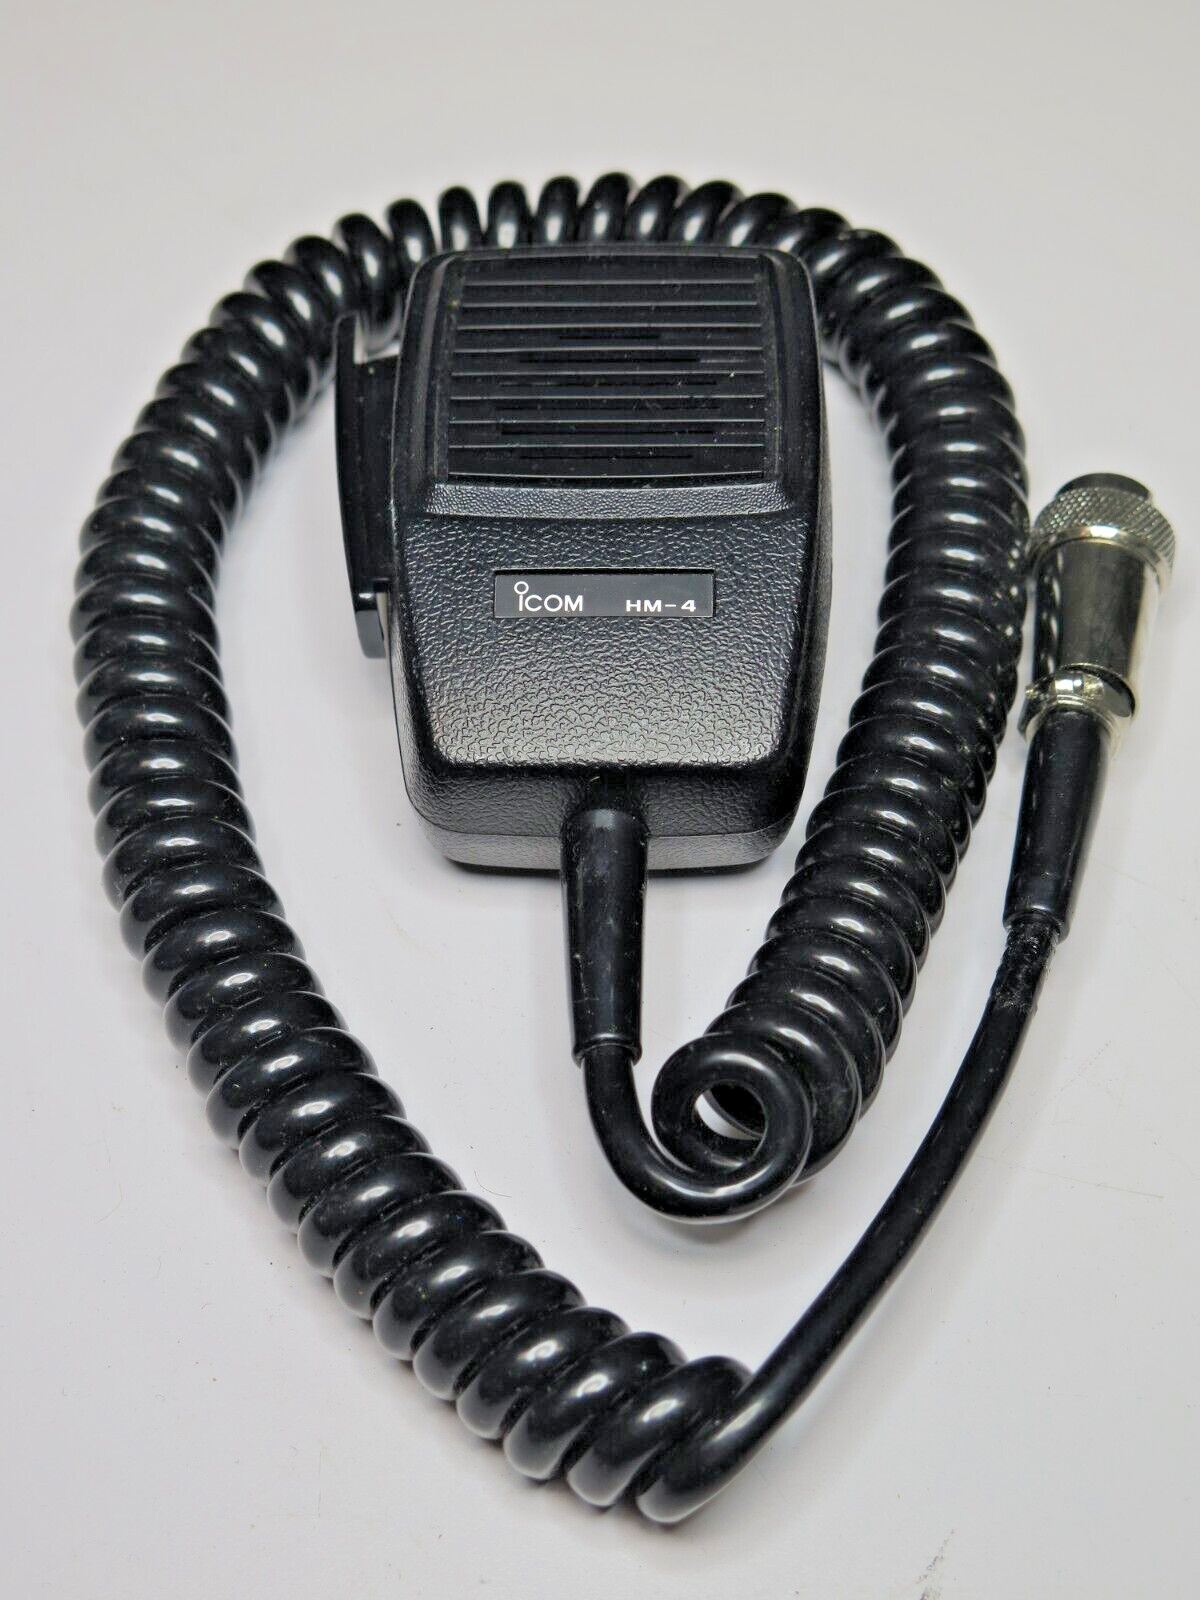 ICOM HM-4 Microphone w/ Coil Cable & 7 Pin Male Round Connector